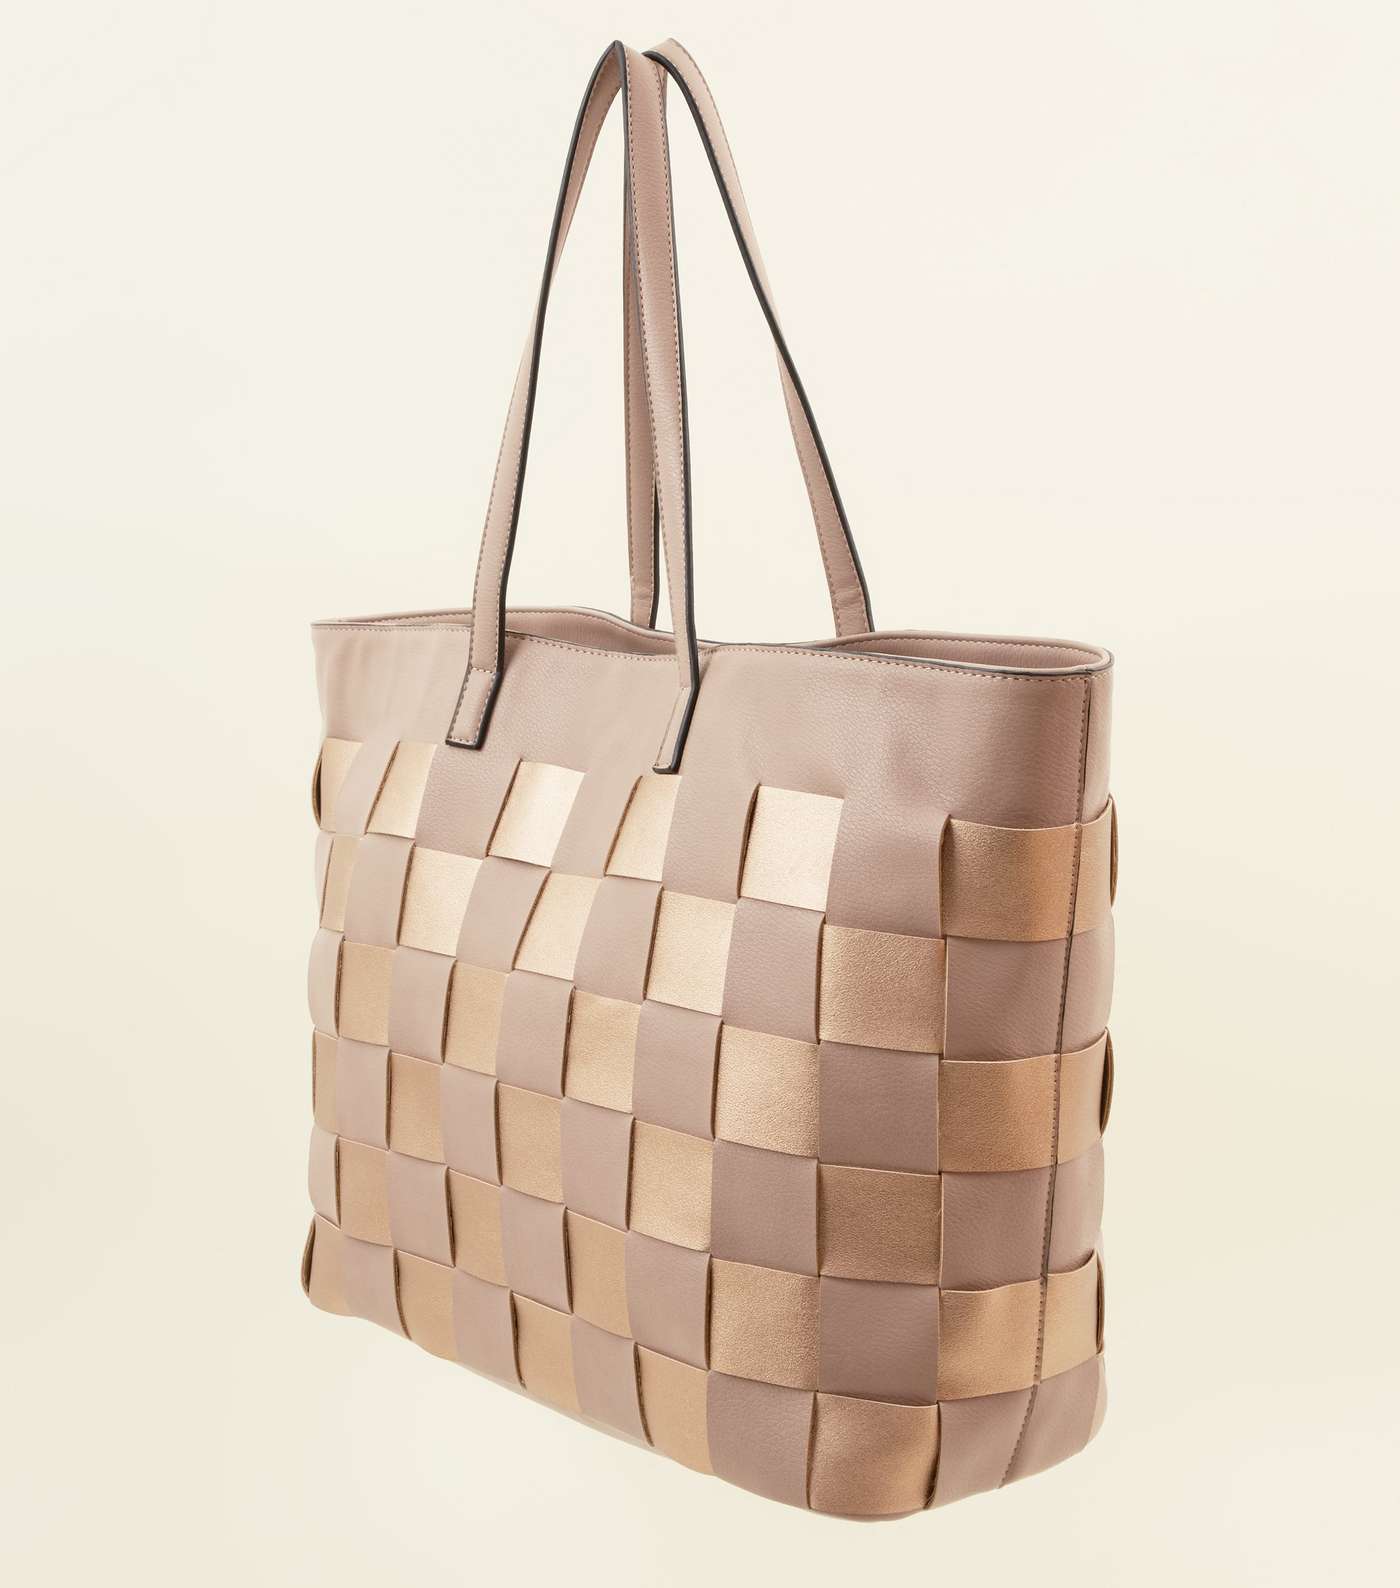 Nude Leather-Look Woven Tote Bag Image 4